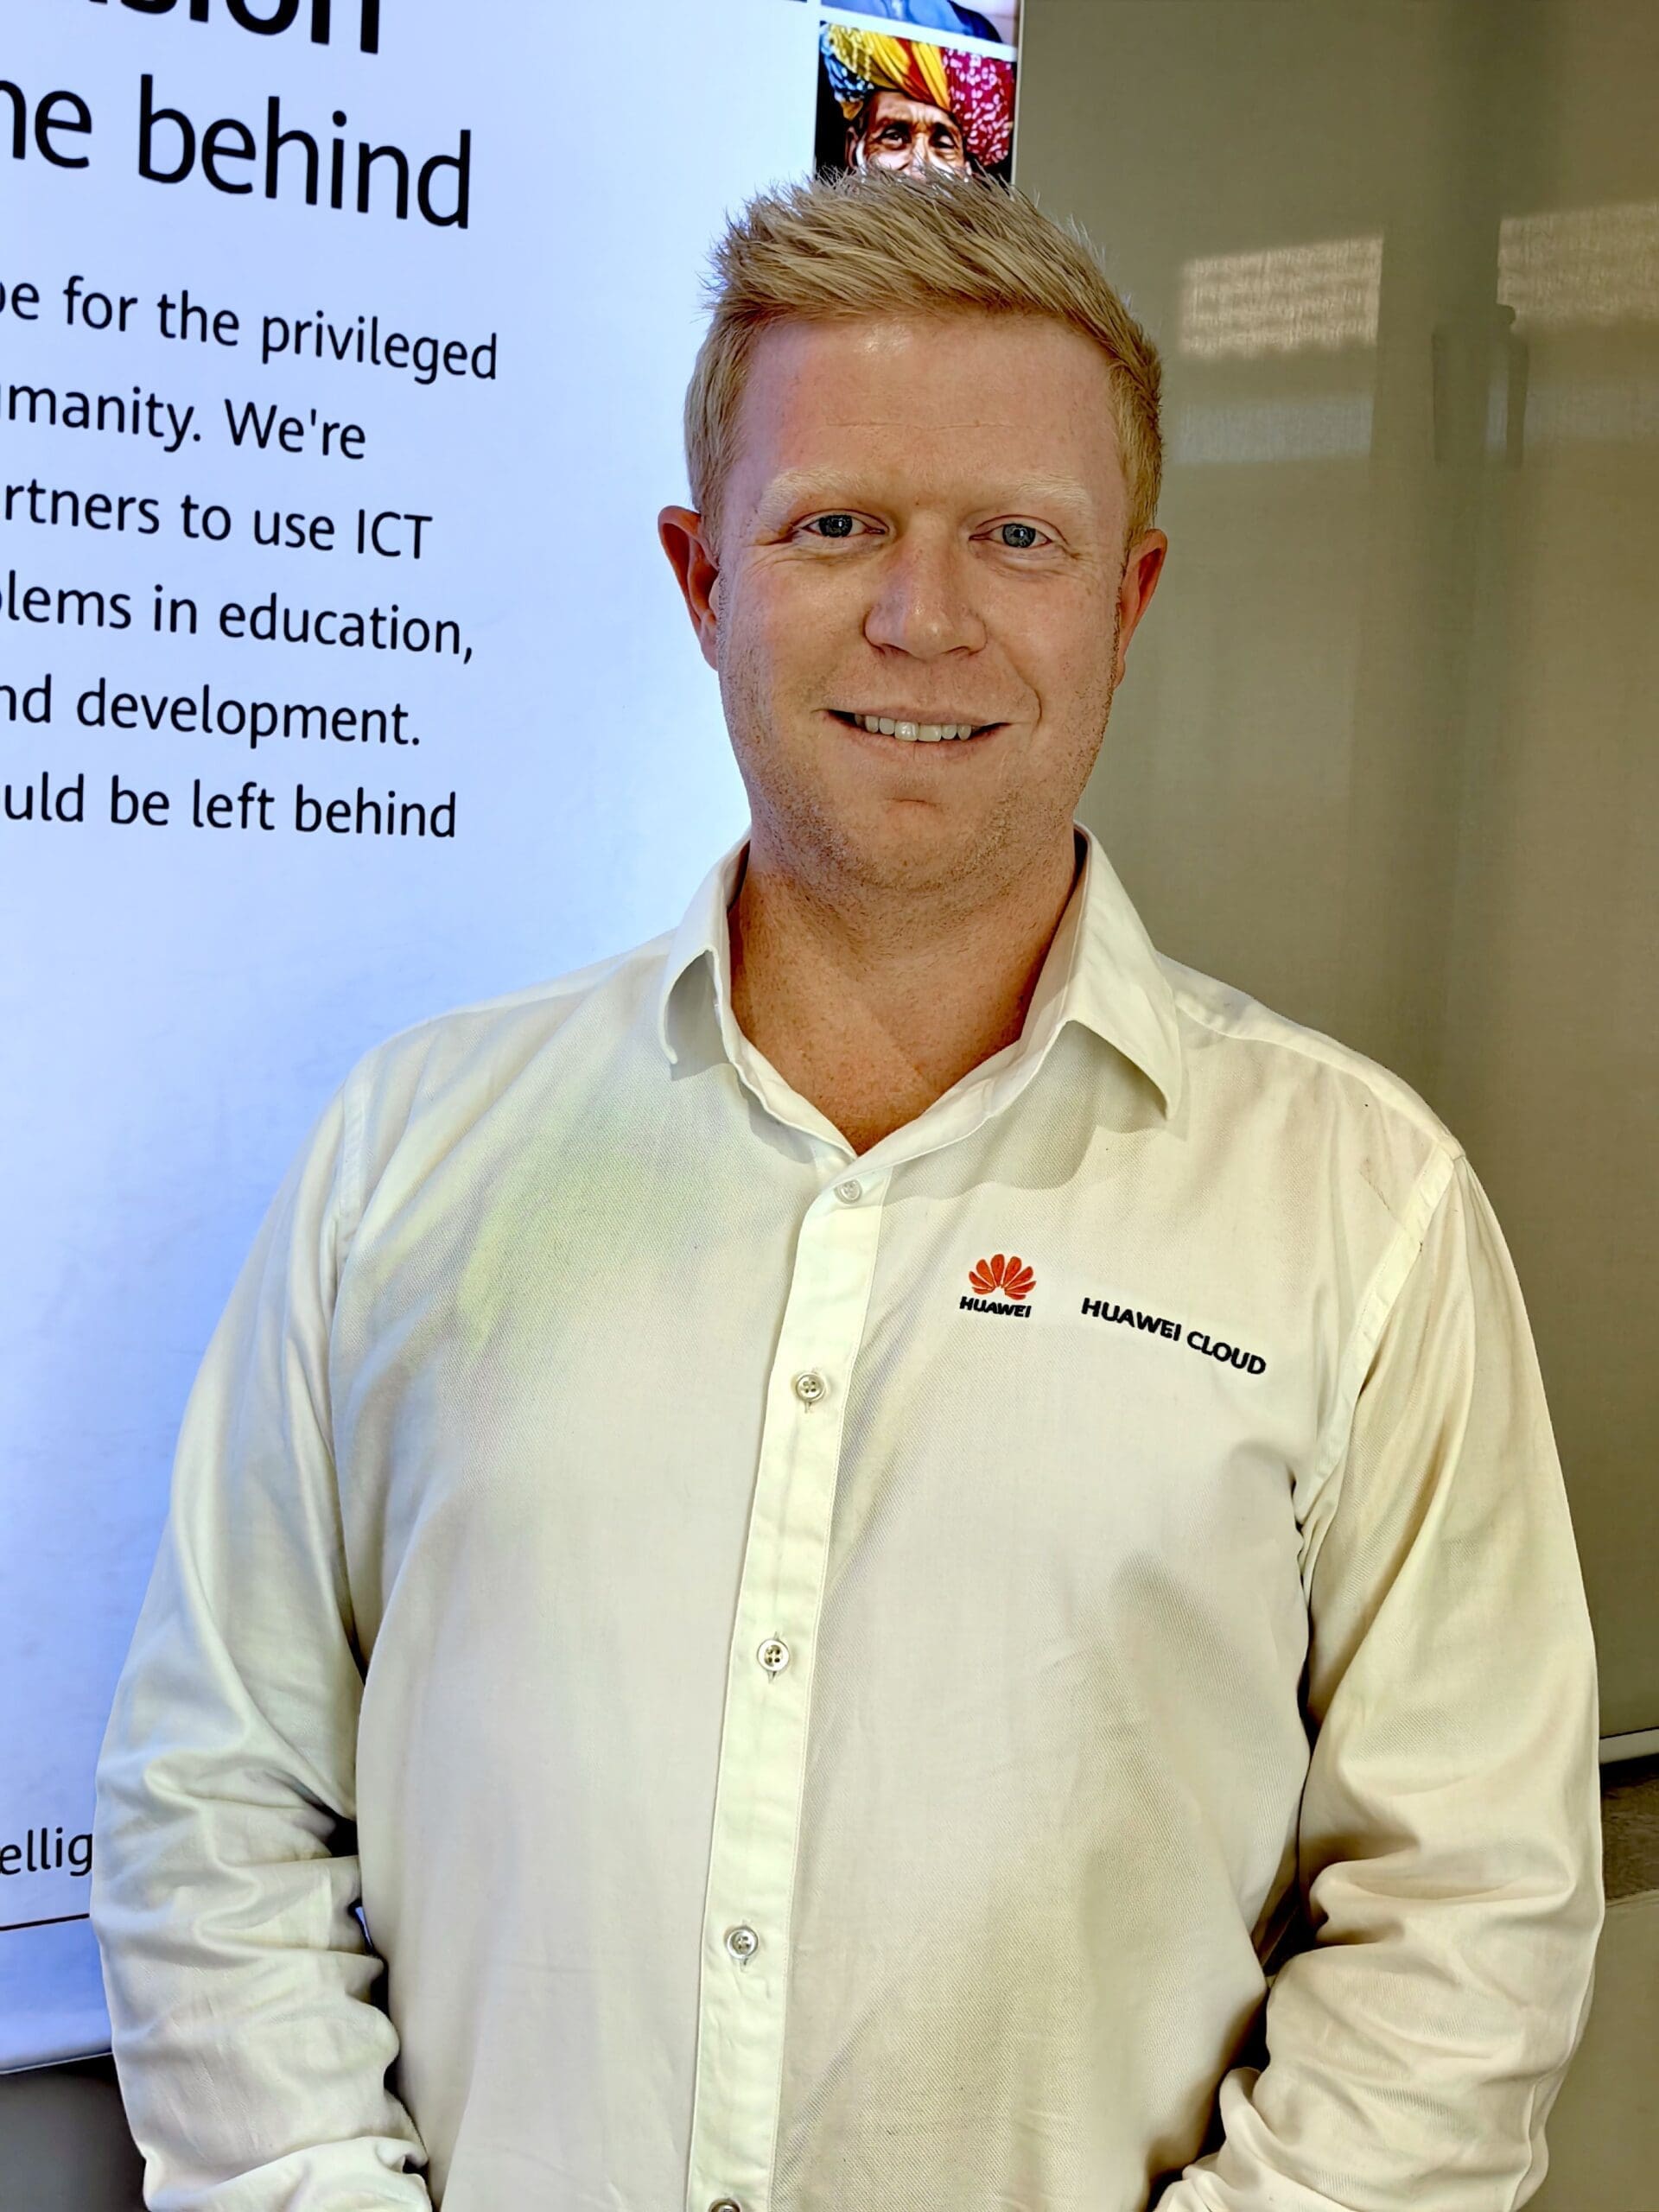 Marcel Meyer, Director of Service Delivery at Huawei Cloud and Huawei Ambassador